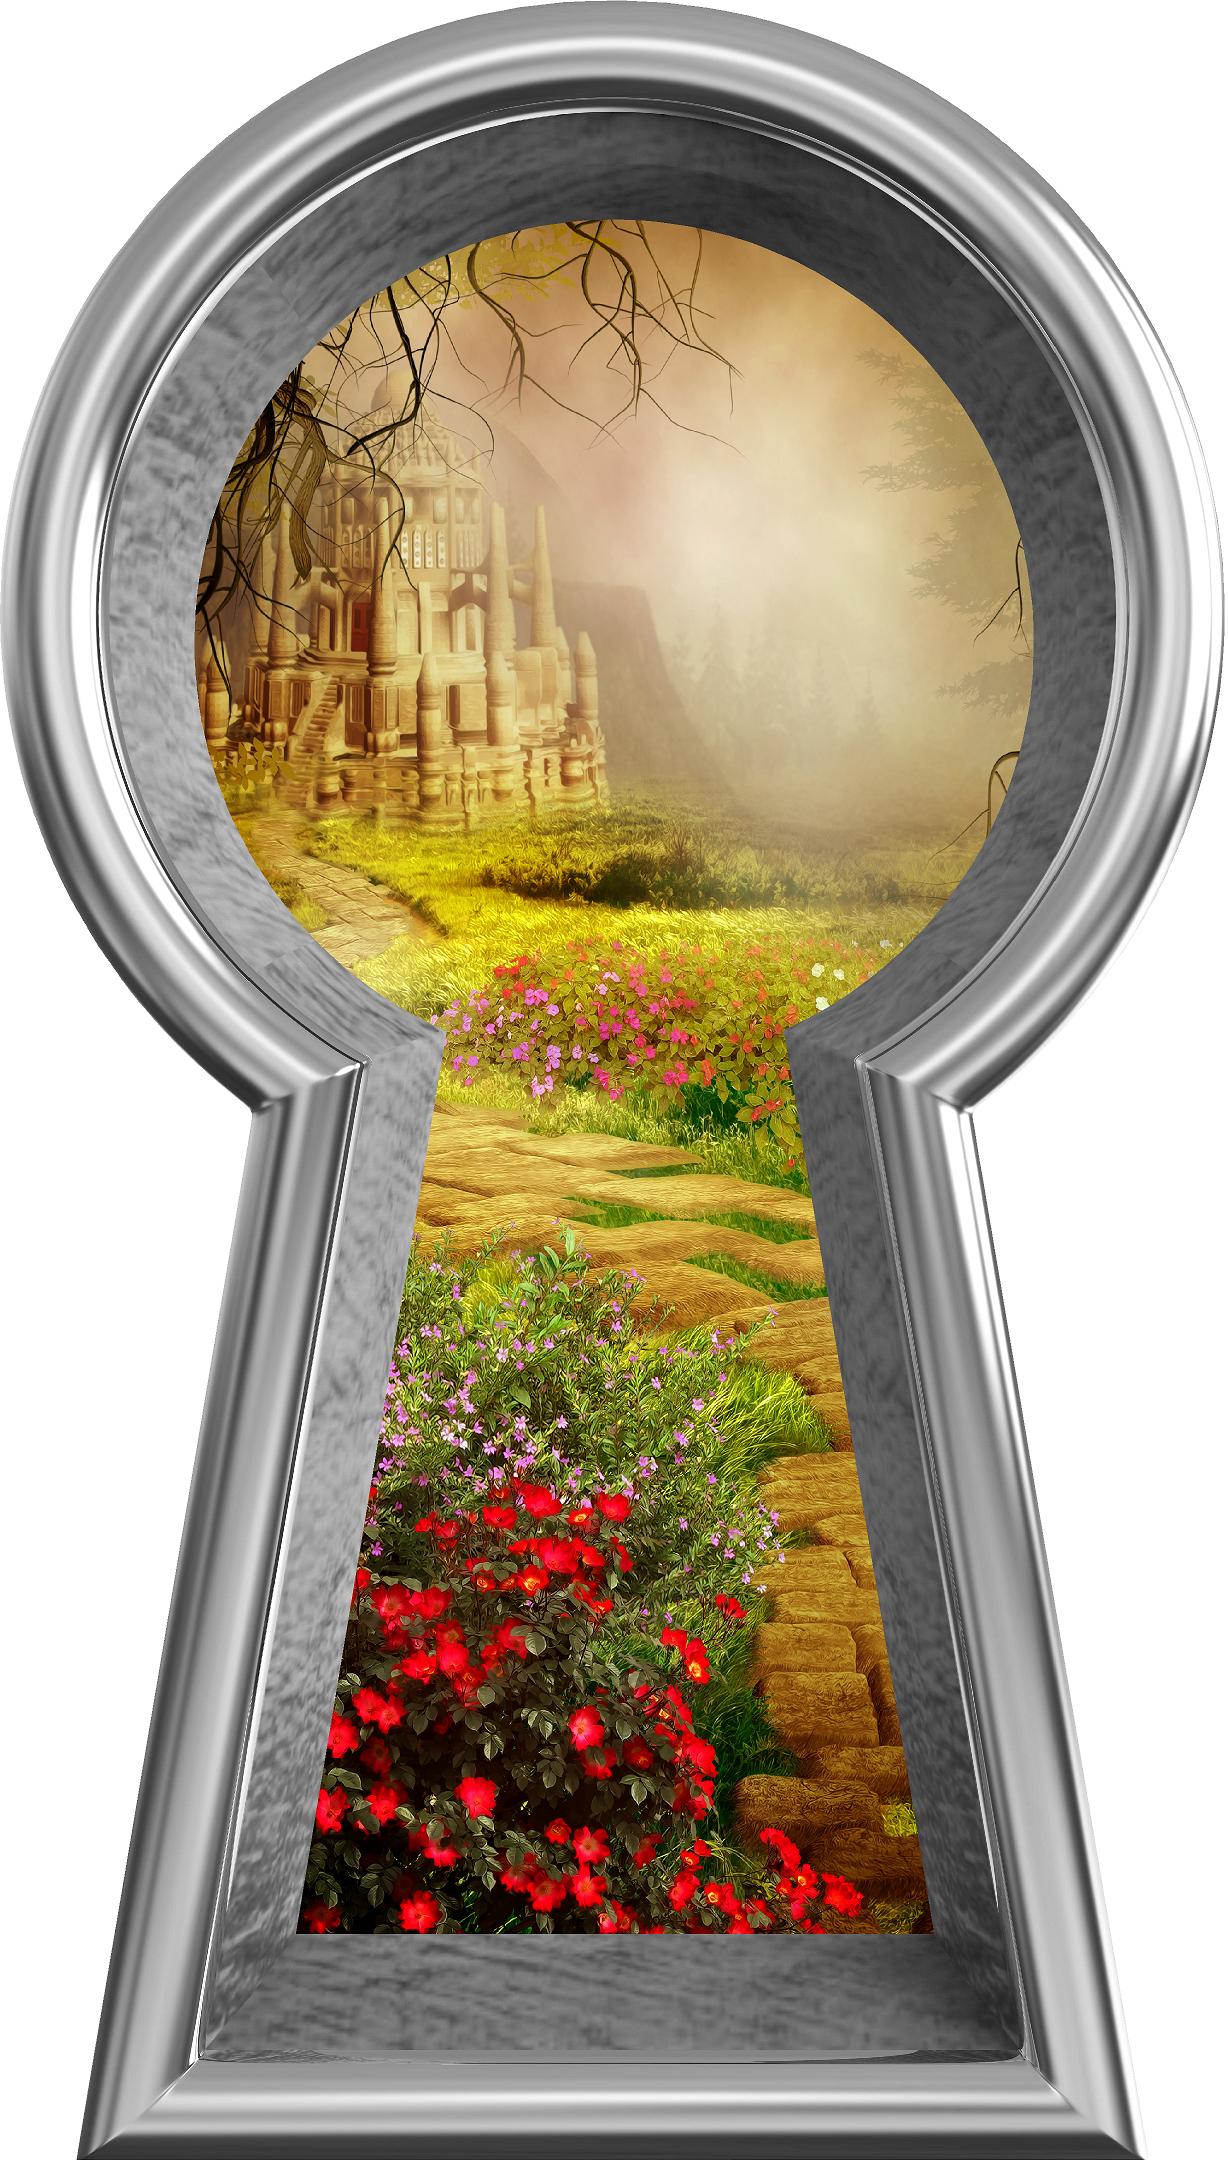 3D Keyhole Wall Decal Stone Path to Fairy Tale Castle Removable Wall Sticker